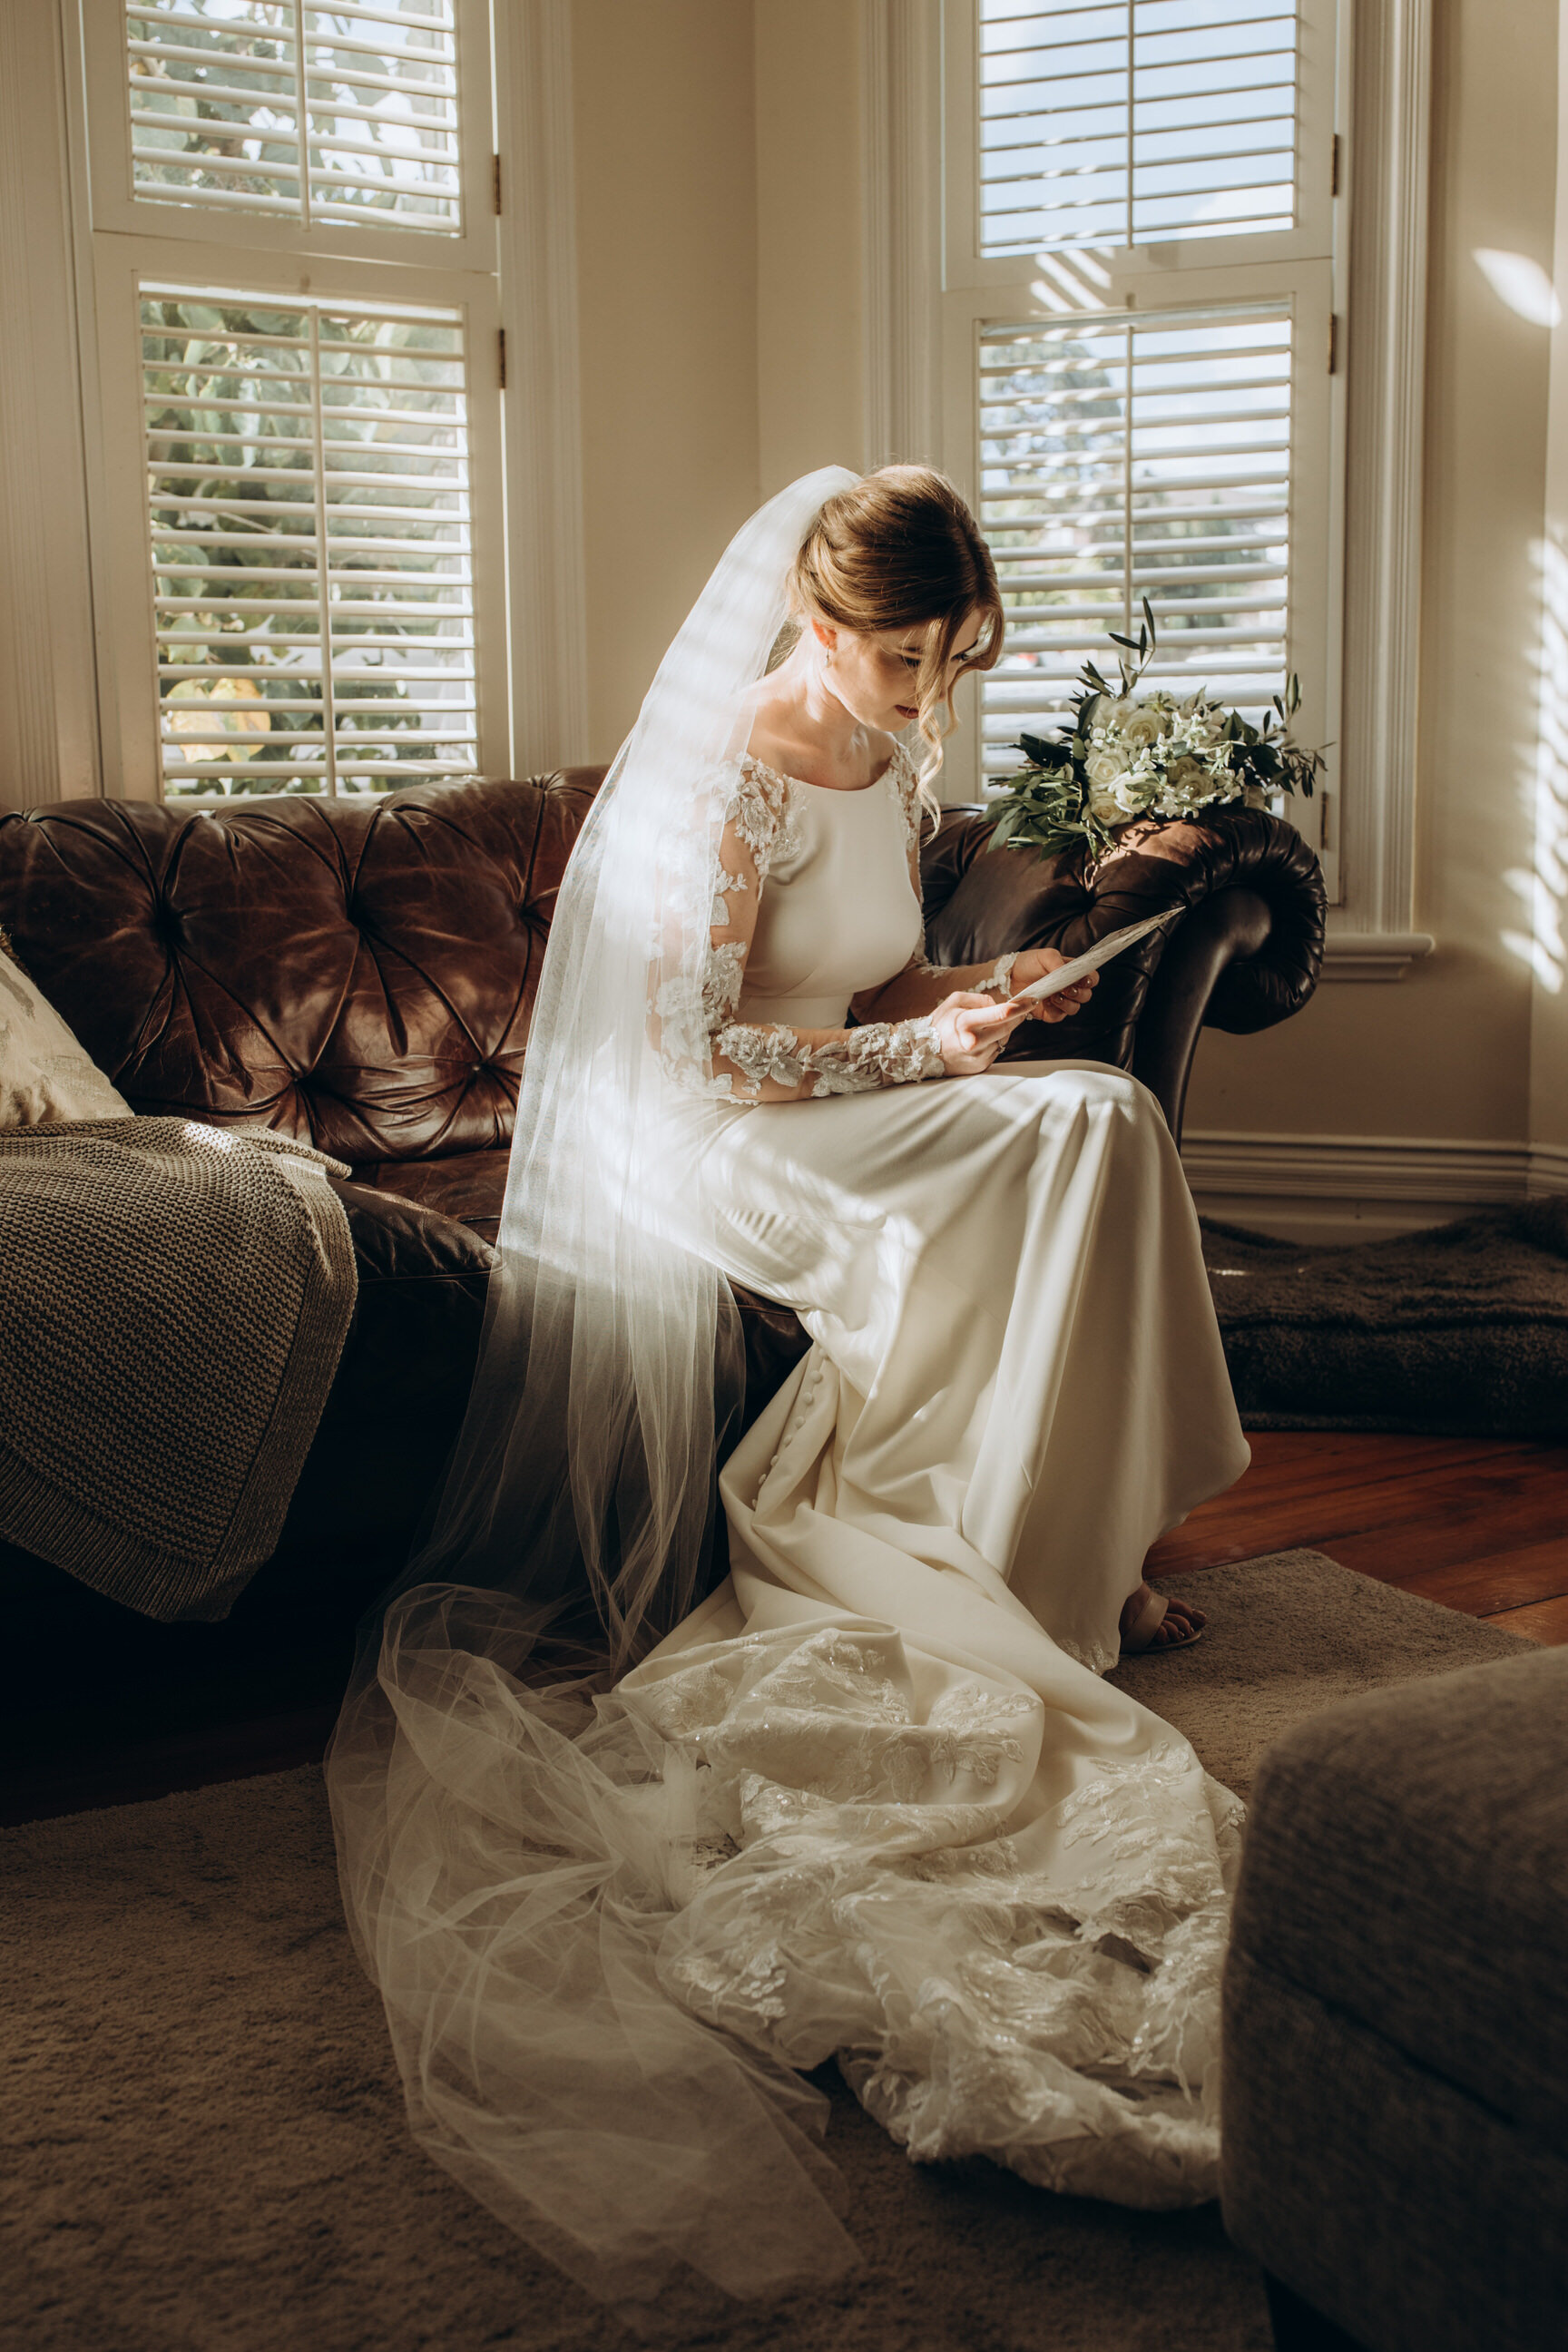 Reading love notes and letters before the wedding ceremony | wedding photos | brideandgroomideas | wedding letters | first touch 